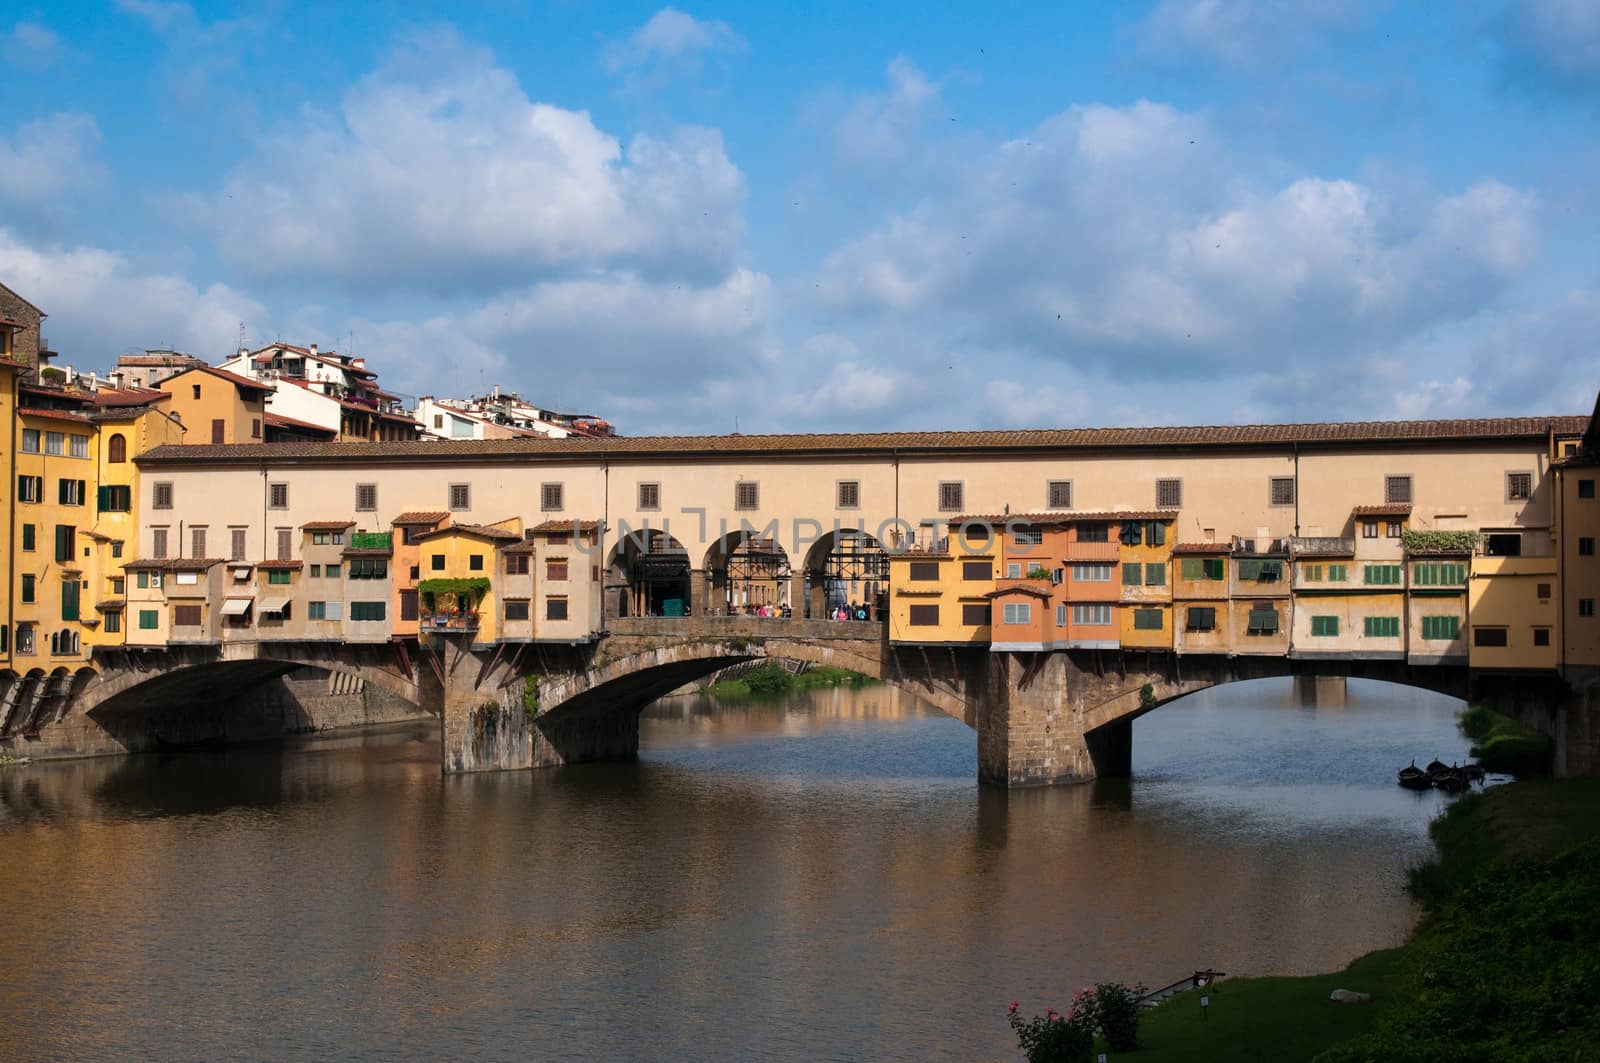 Crowds of tourists visit the Ponte Vecchio ("Old Bridge") which is a Medieval bridge over the Arno River in Florence, Tuscany, Italy. by lexan